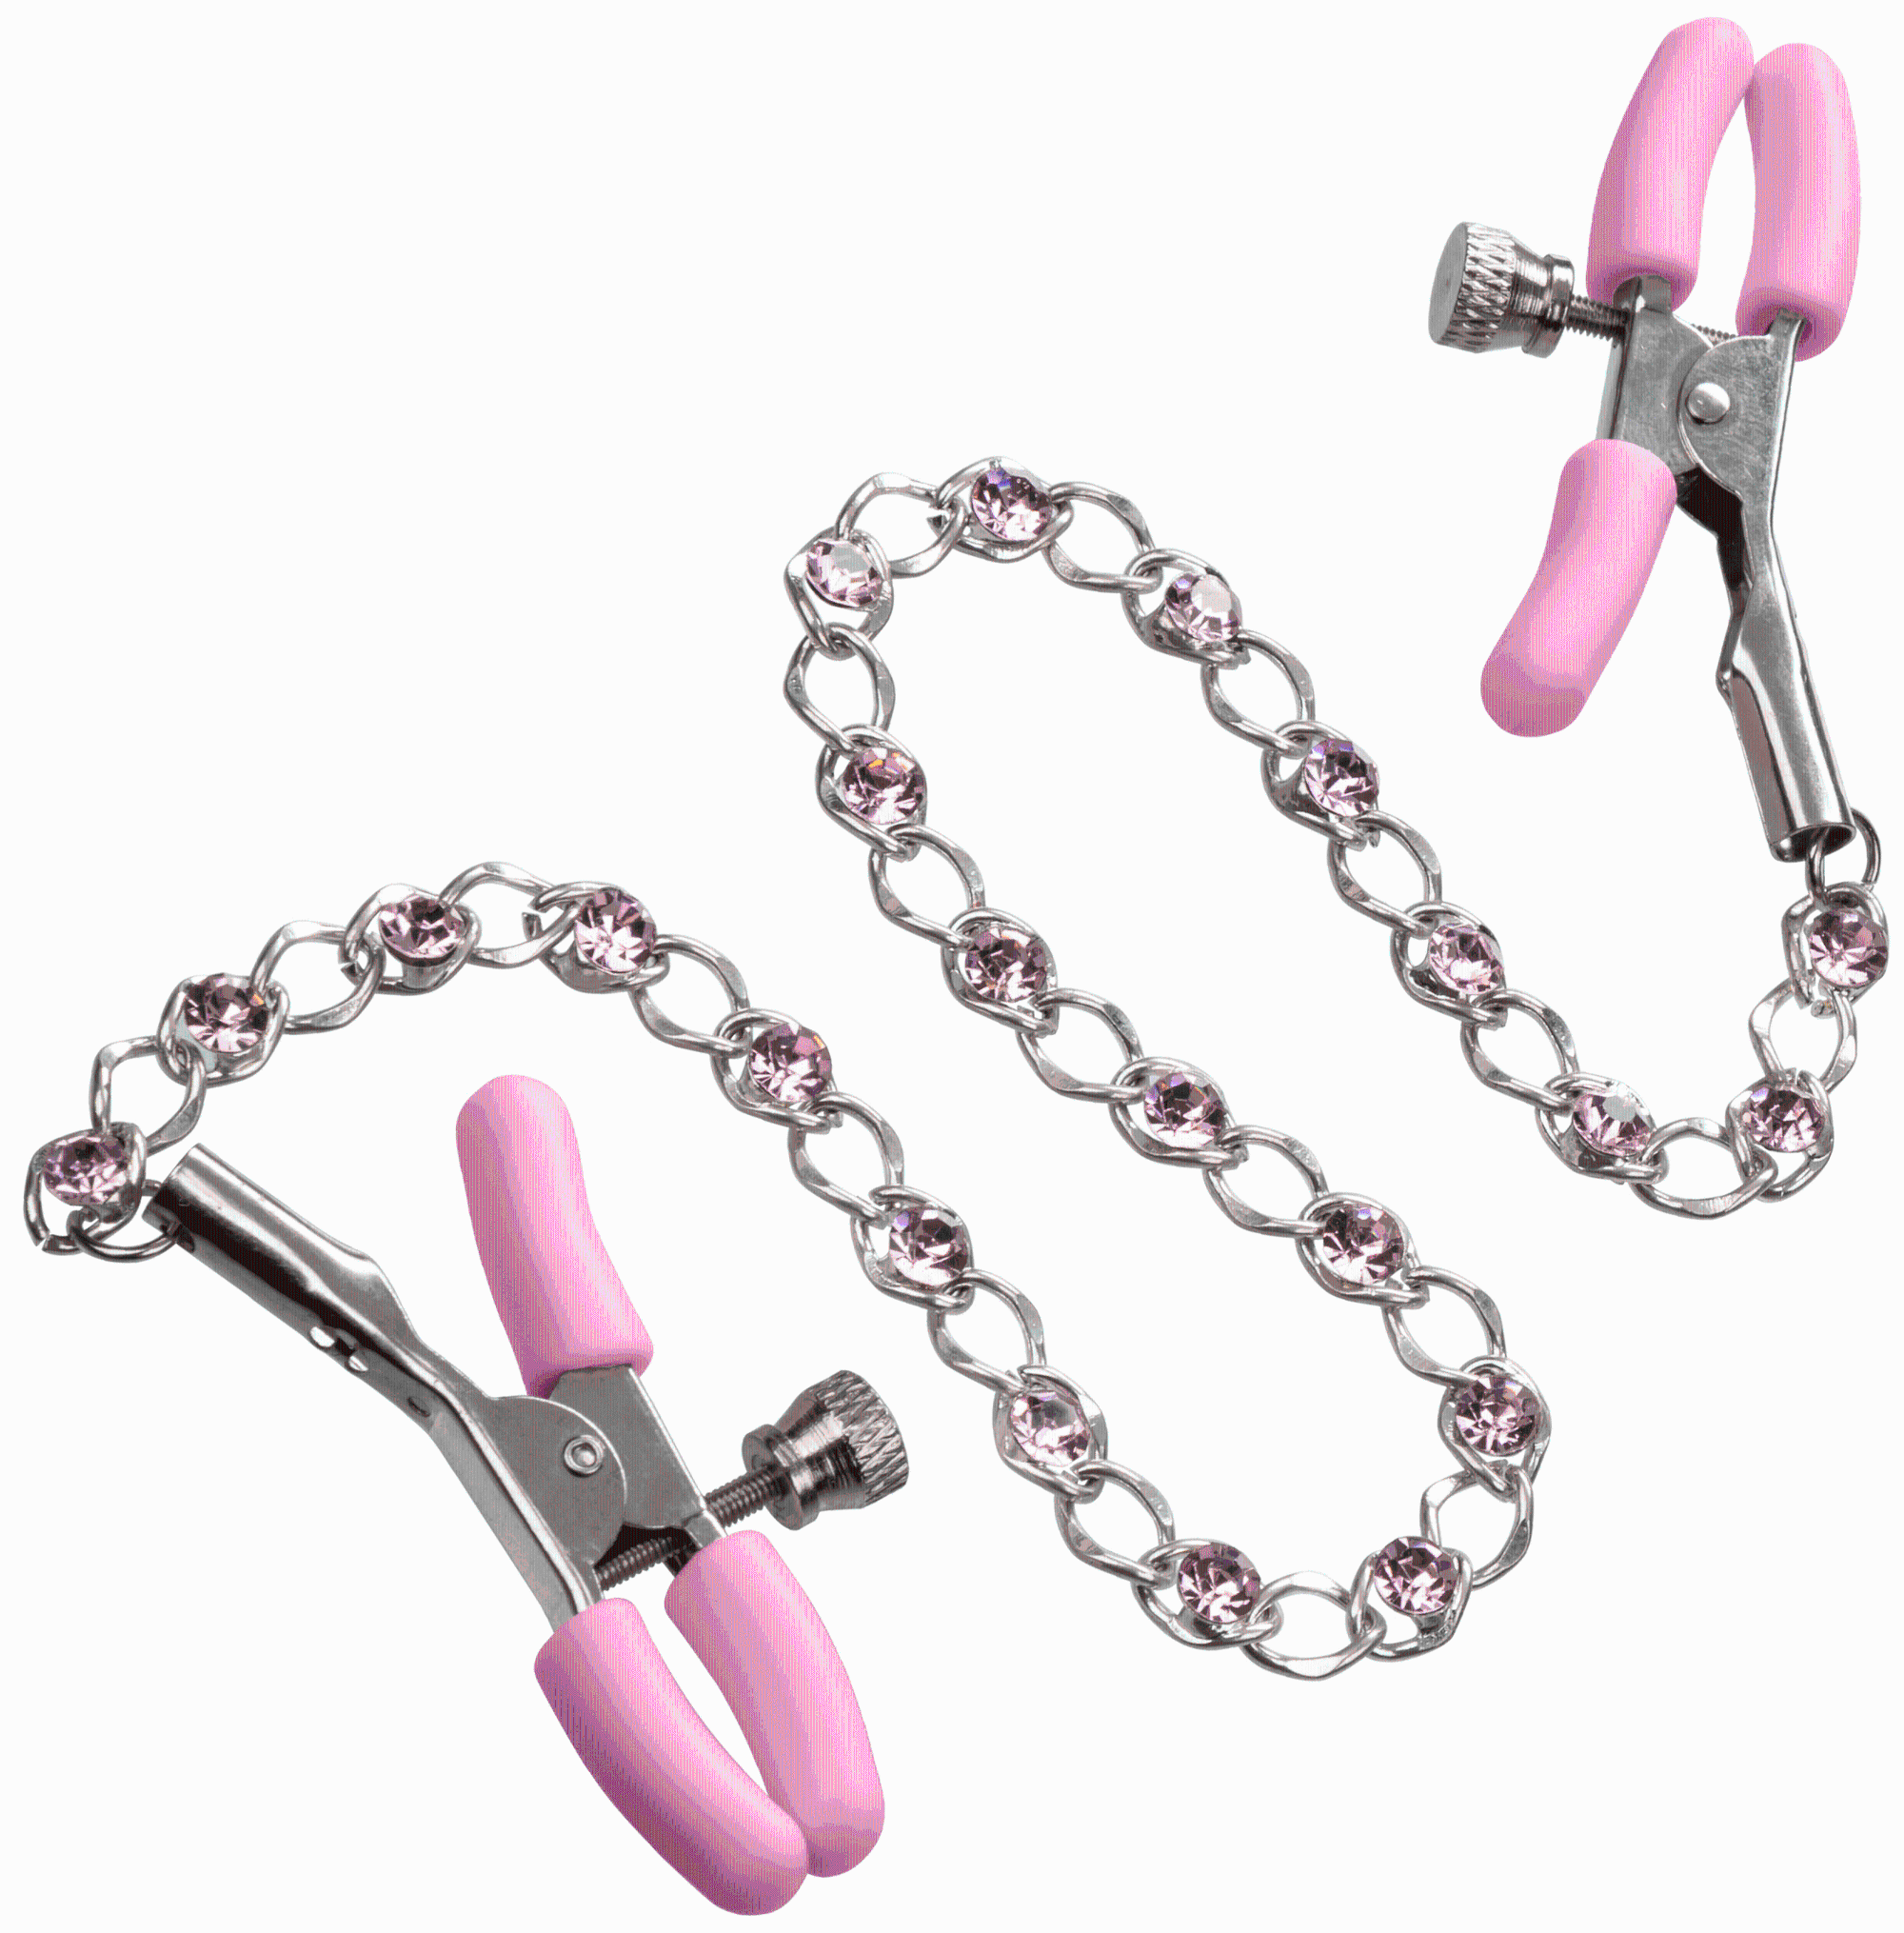 nipple clamps, clamped nipples